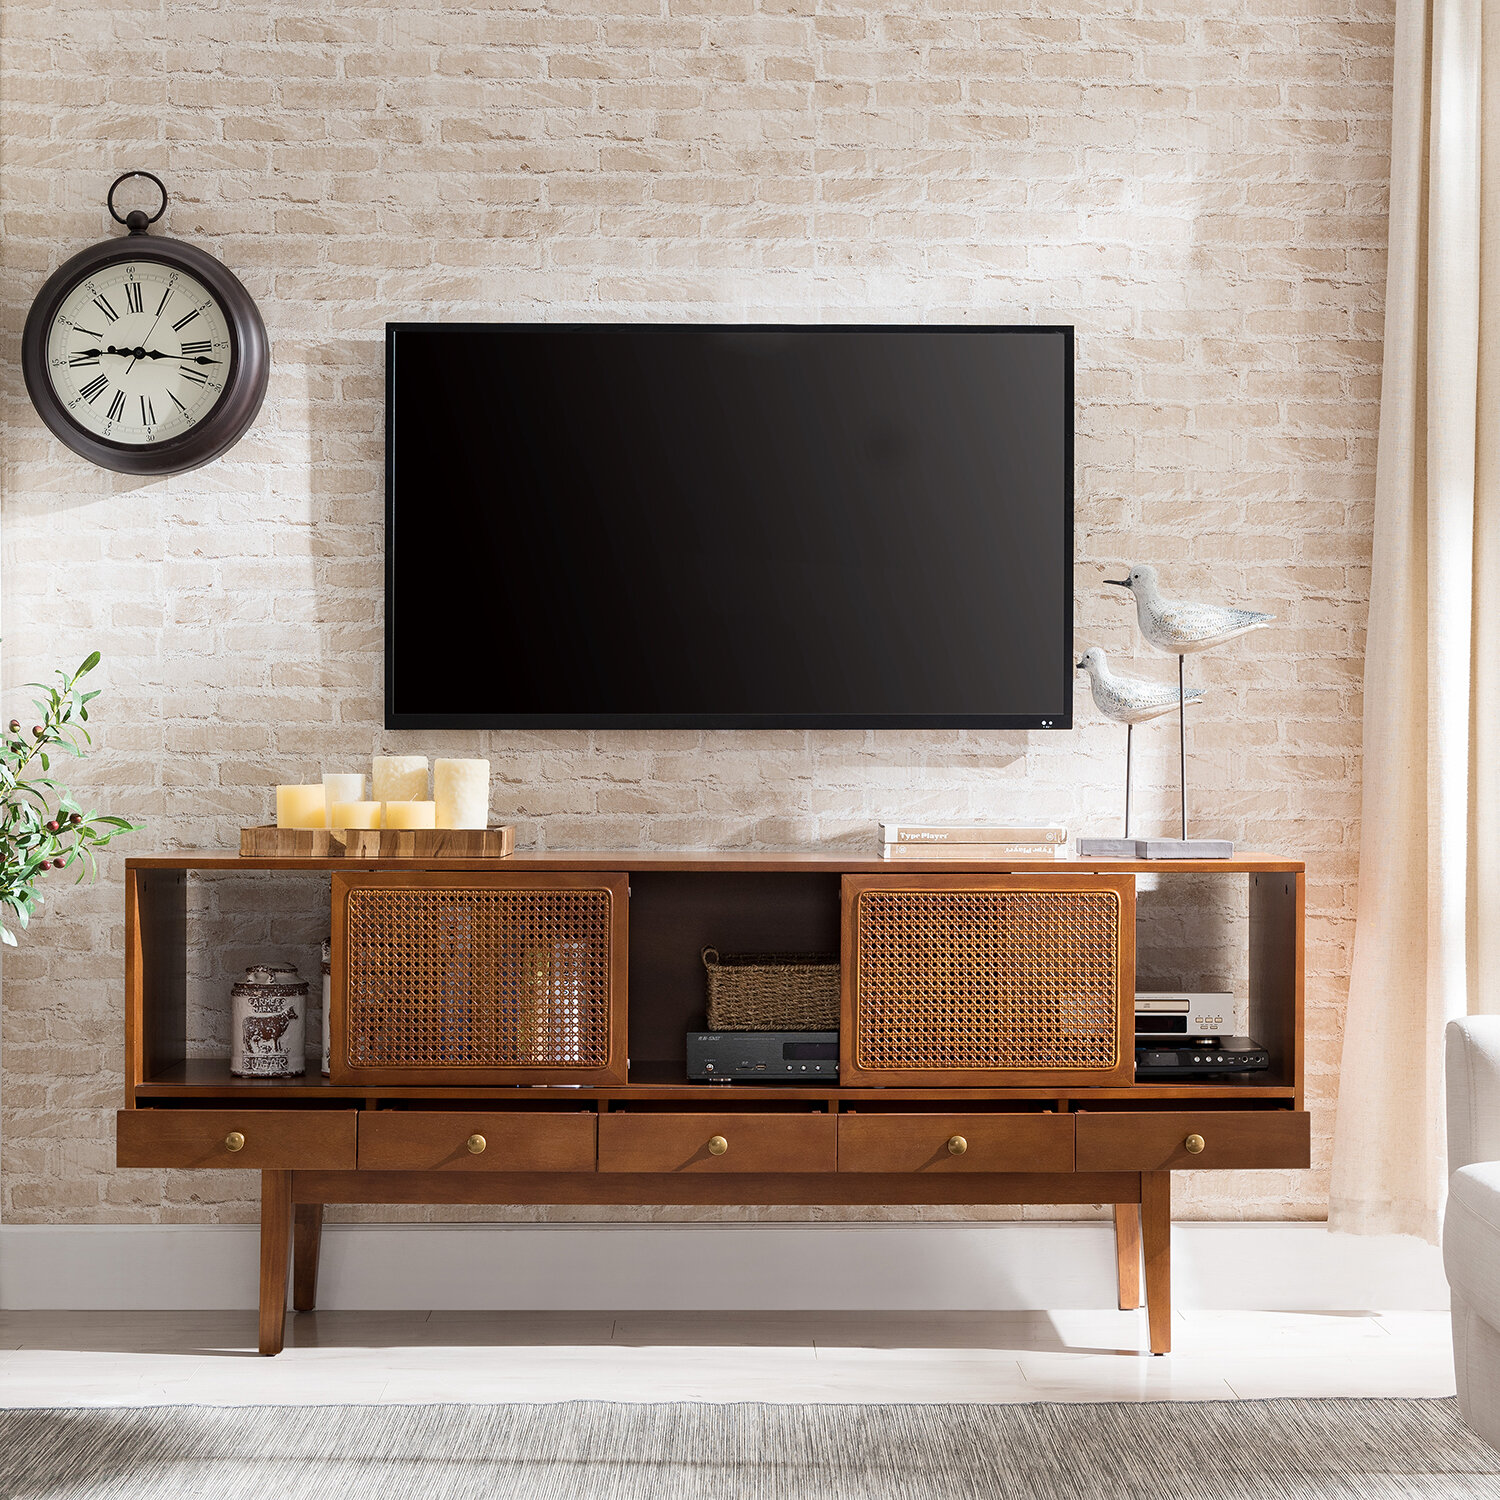 George Oliver Dwight Cabinet Enclosed Storage Tv Stand For ...